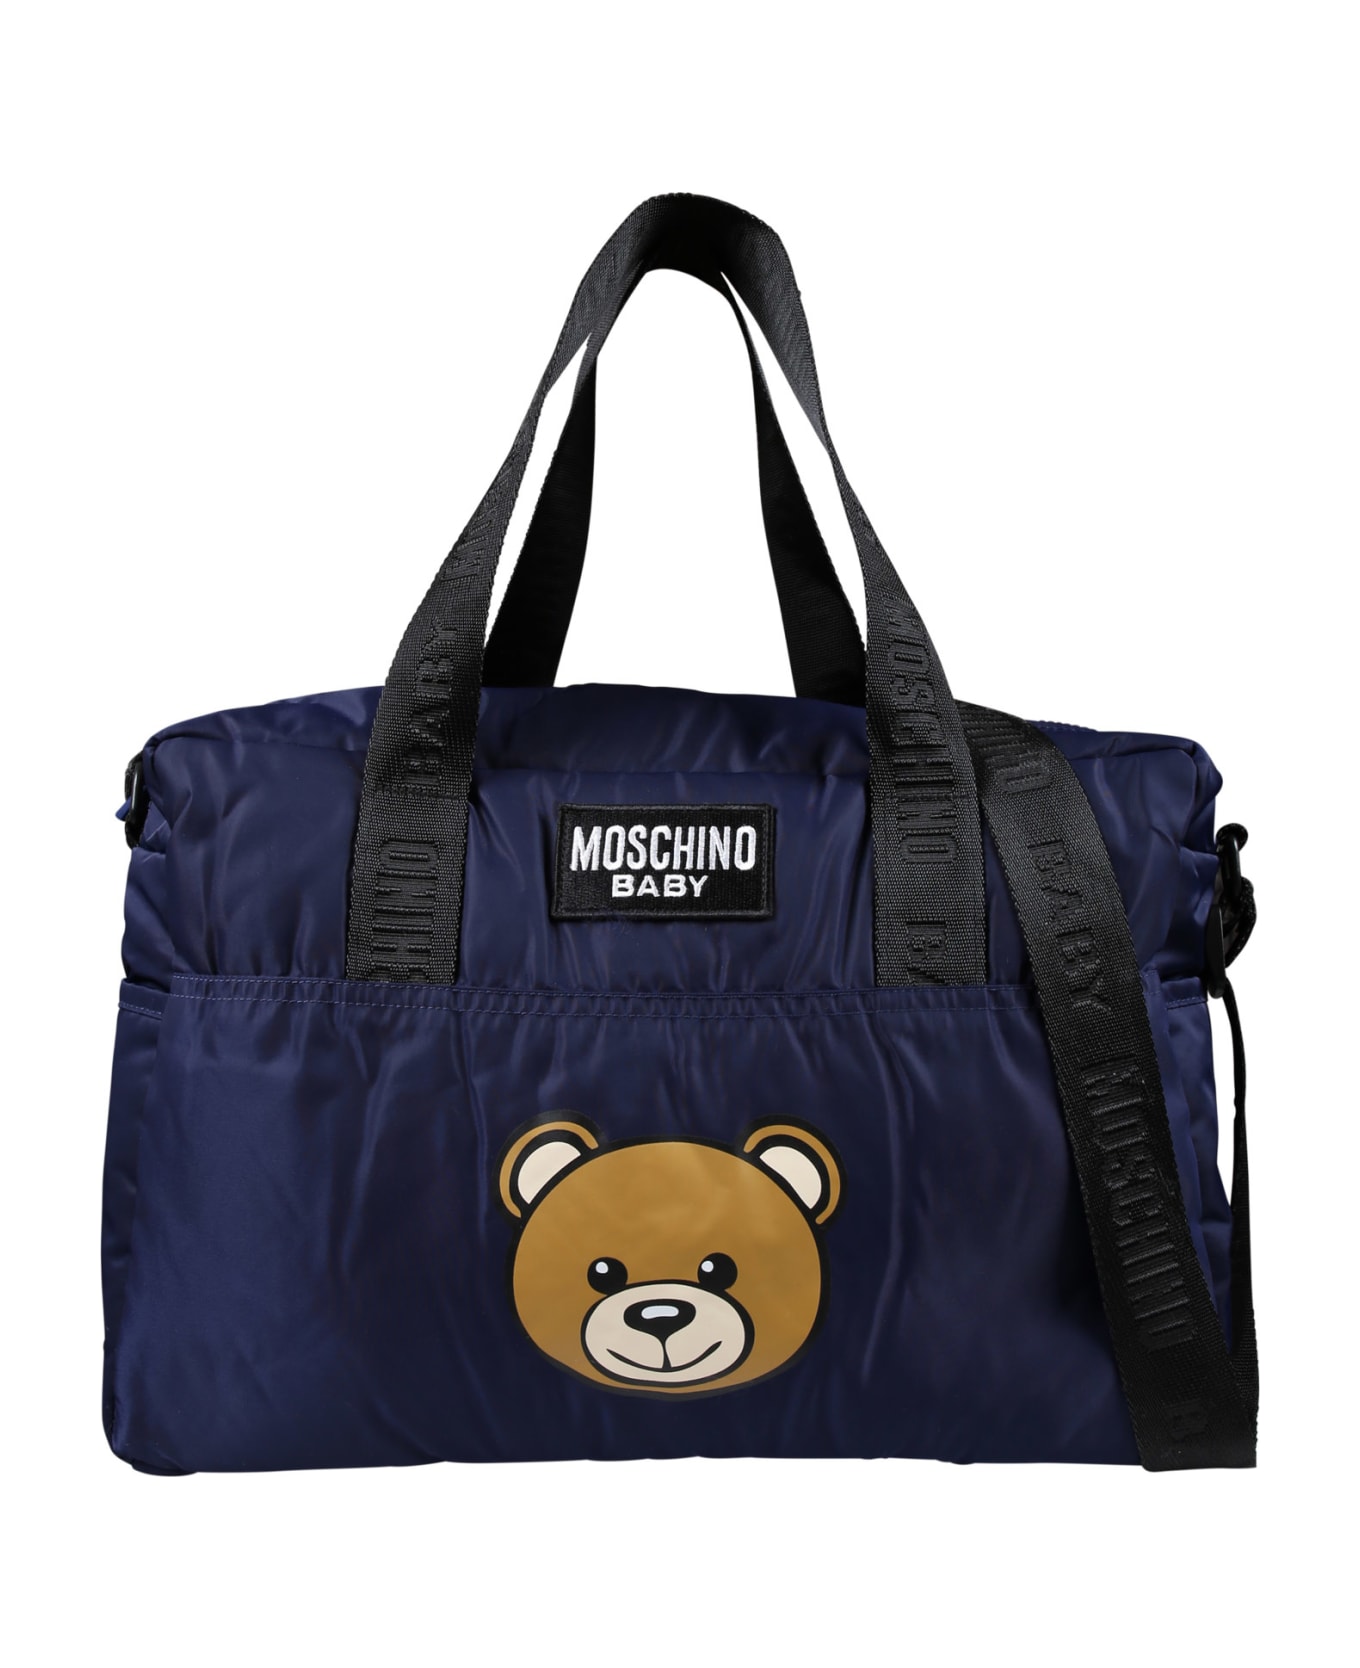 Moschino Blue Mom Bag For Babies With Teddy Bear And Logo - Blue アクセサリー＆ギフト